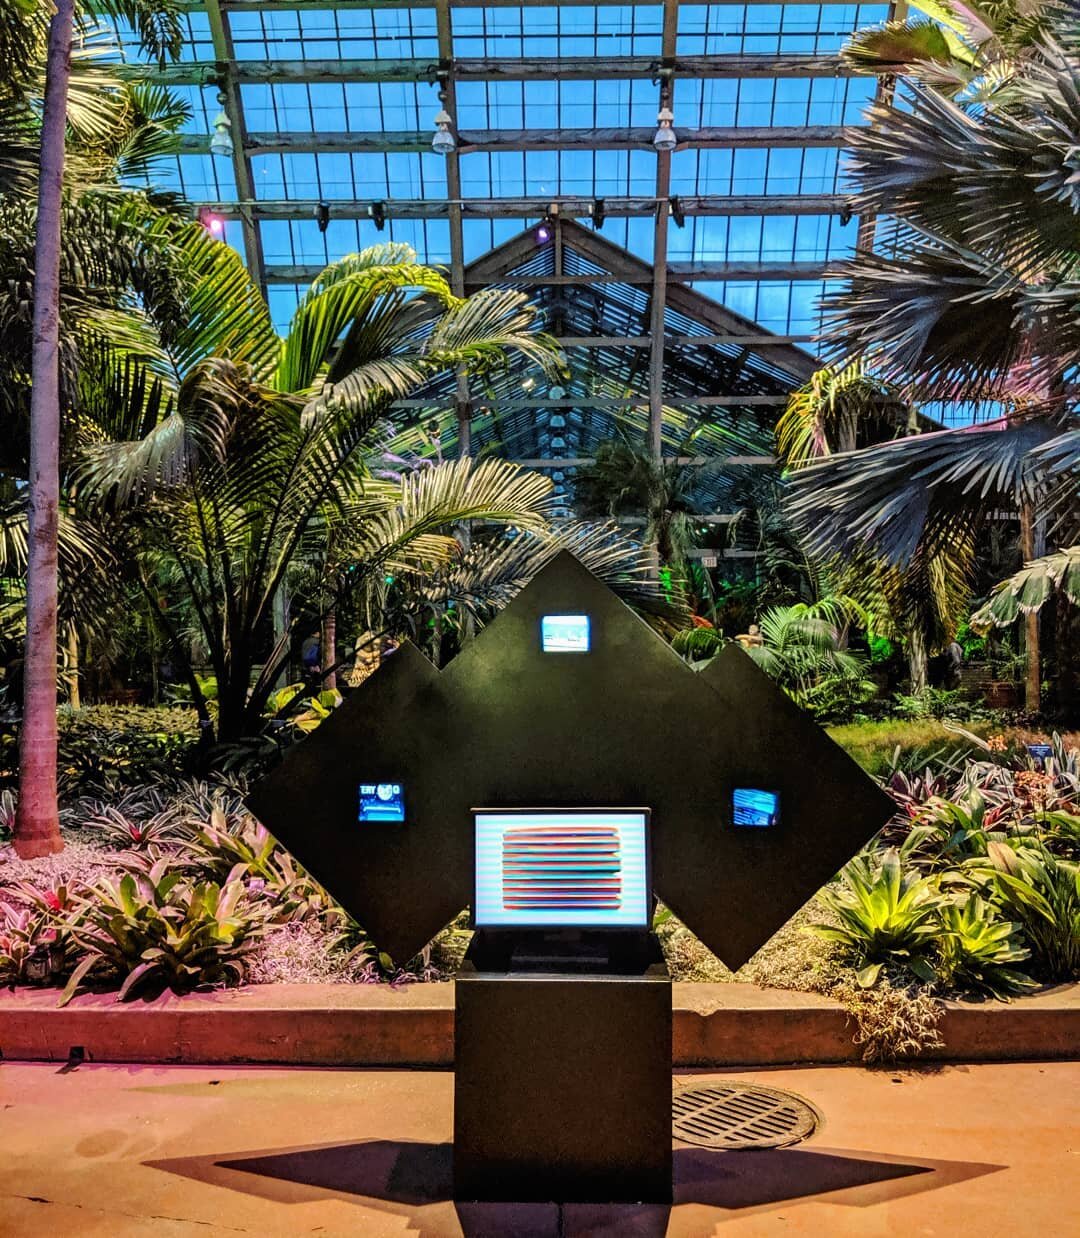 Hard to believe it was a year ago we got the haul this sculpture over to one of our favorite places - @gpconservatory ❤️ for one of our favorite promotors, @emptybottle - we miss the smell of this landmark and all the great programming, but we know t